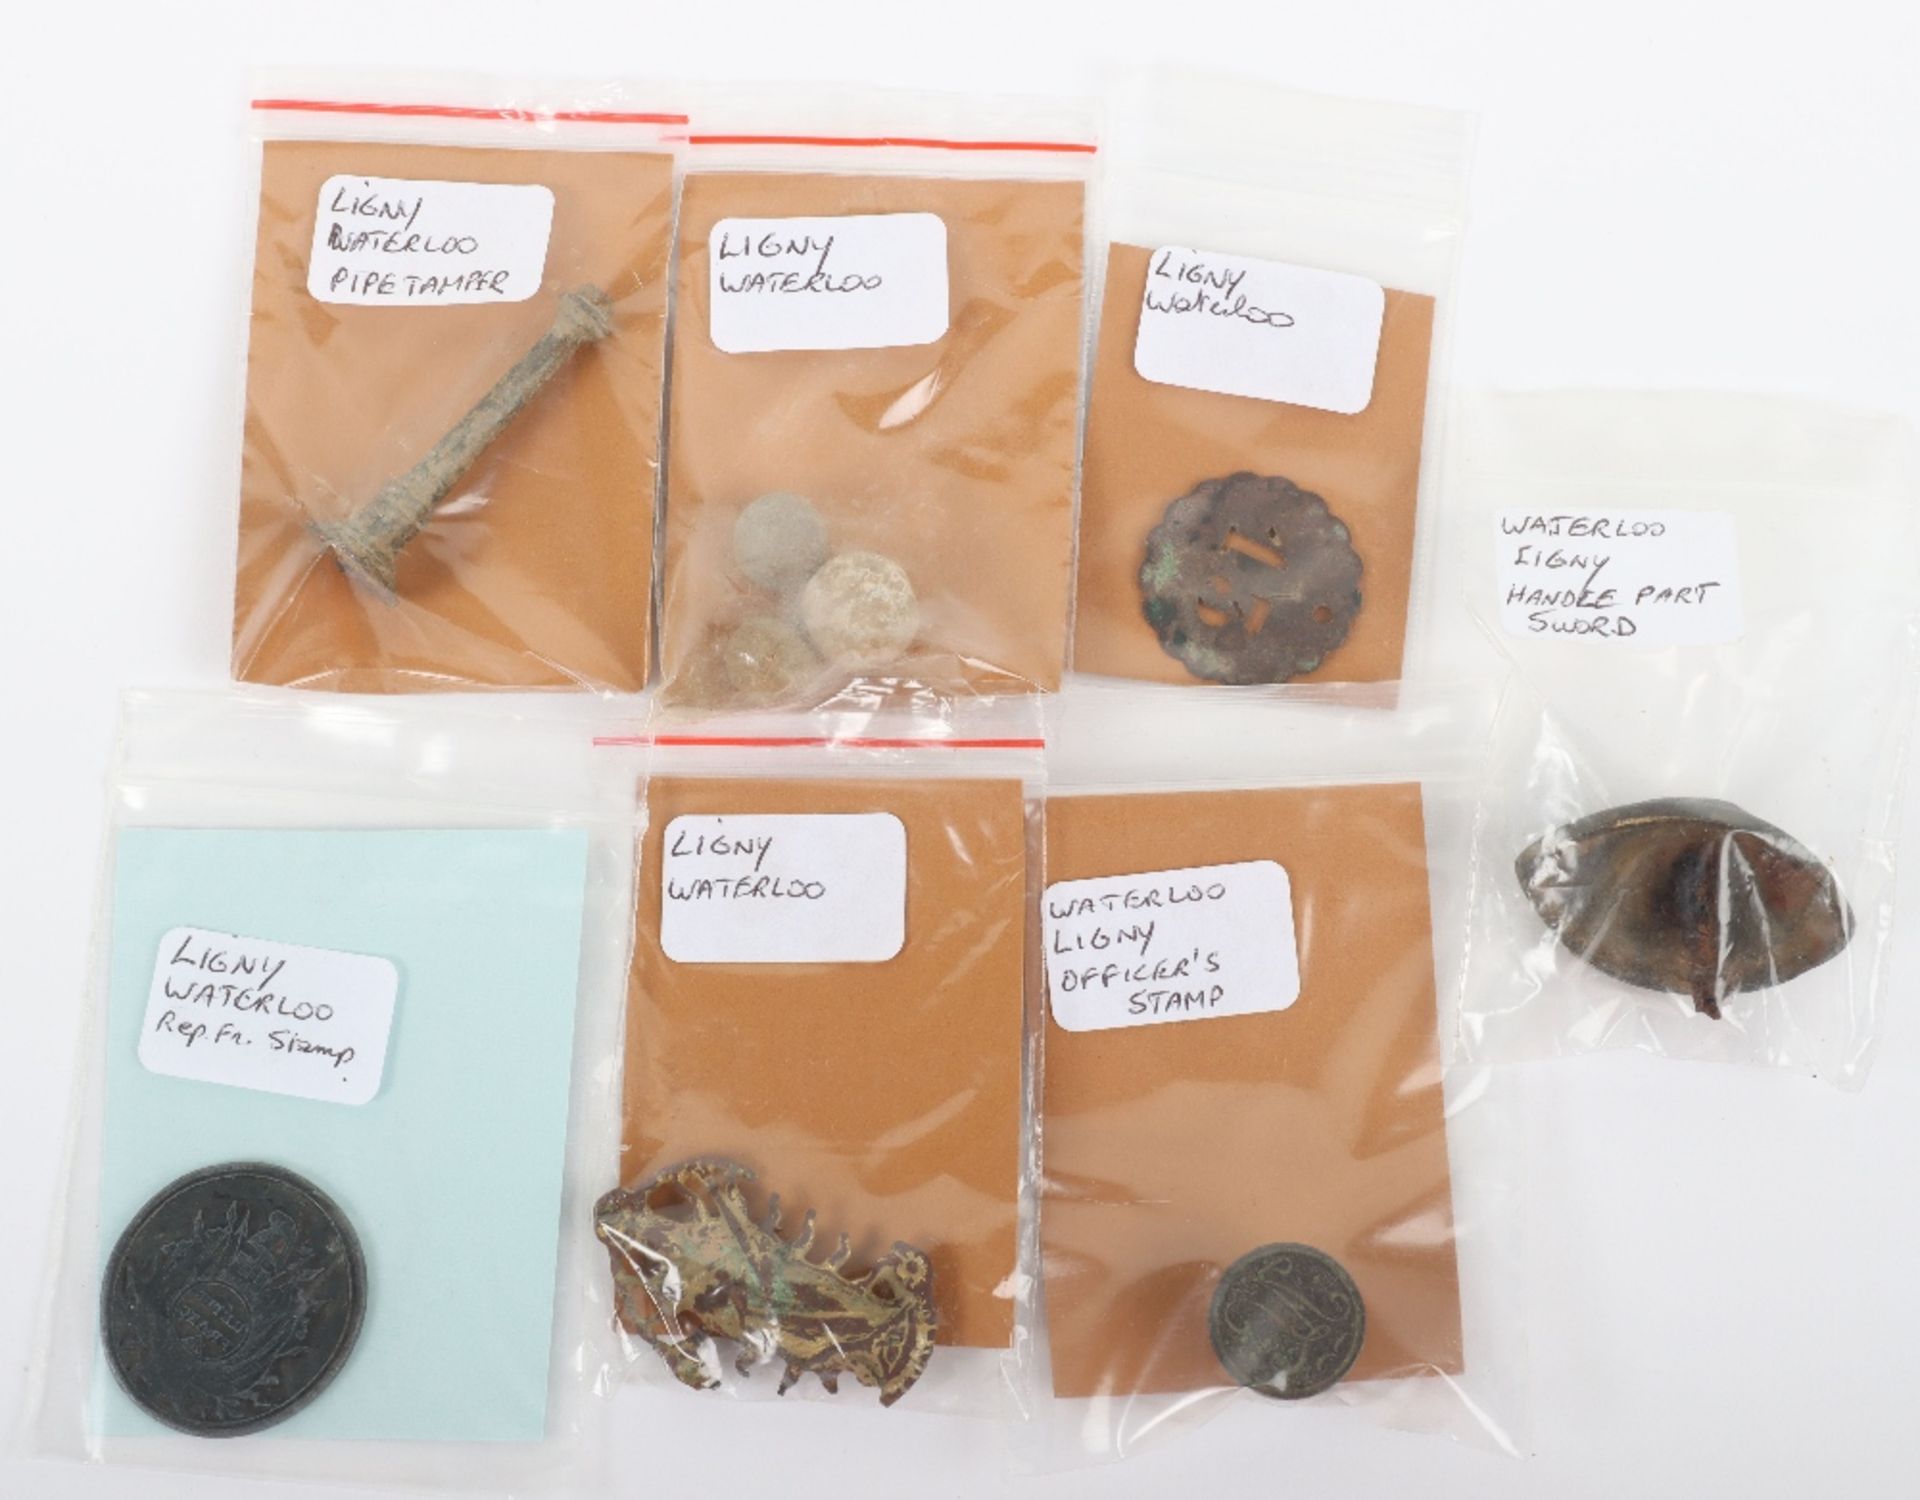 An Assortment of Relics Found at Ligny on the Waterloo Battlefield